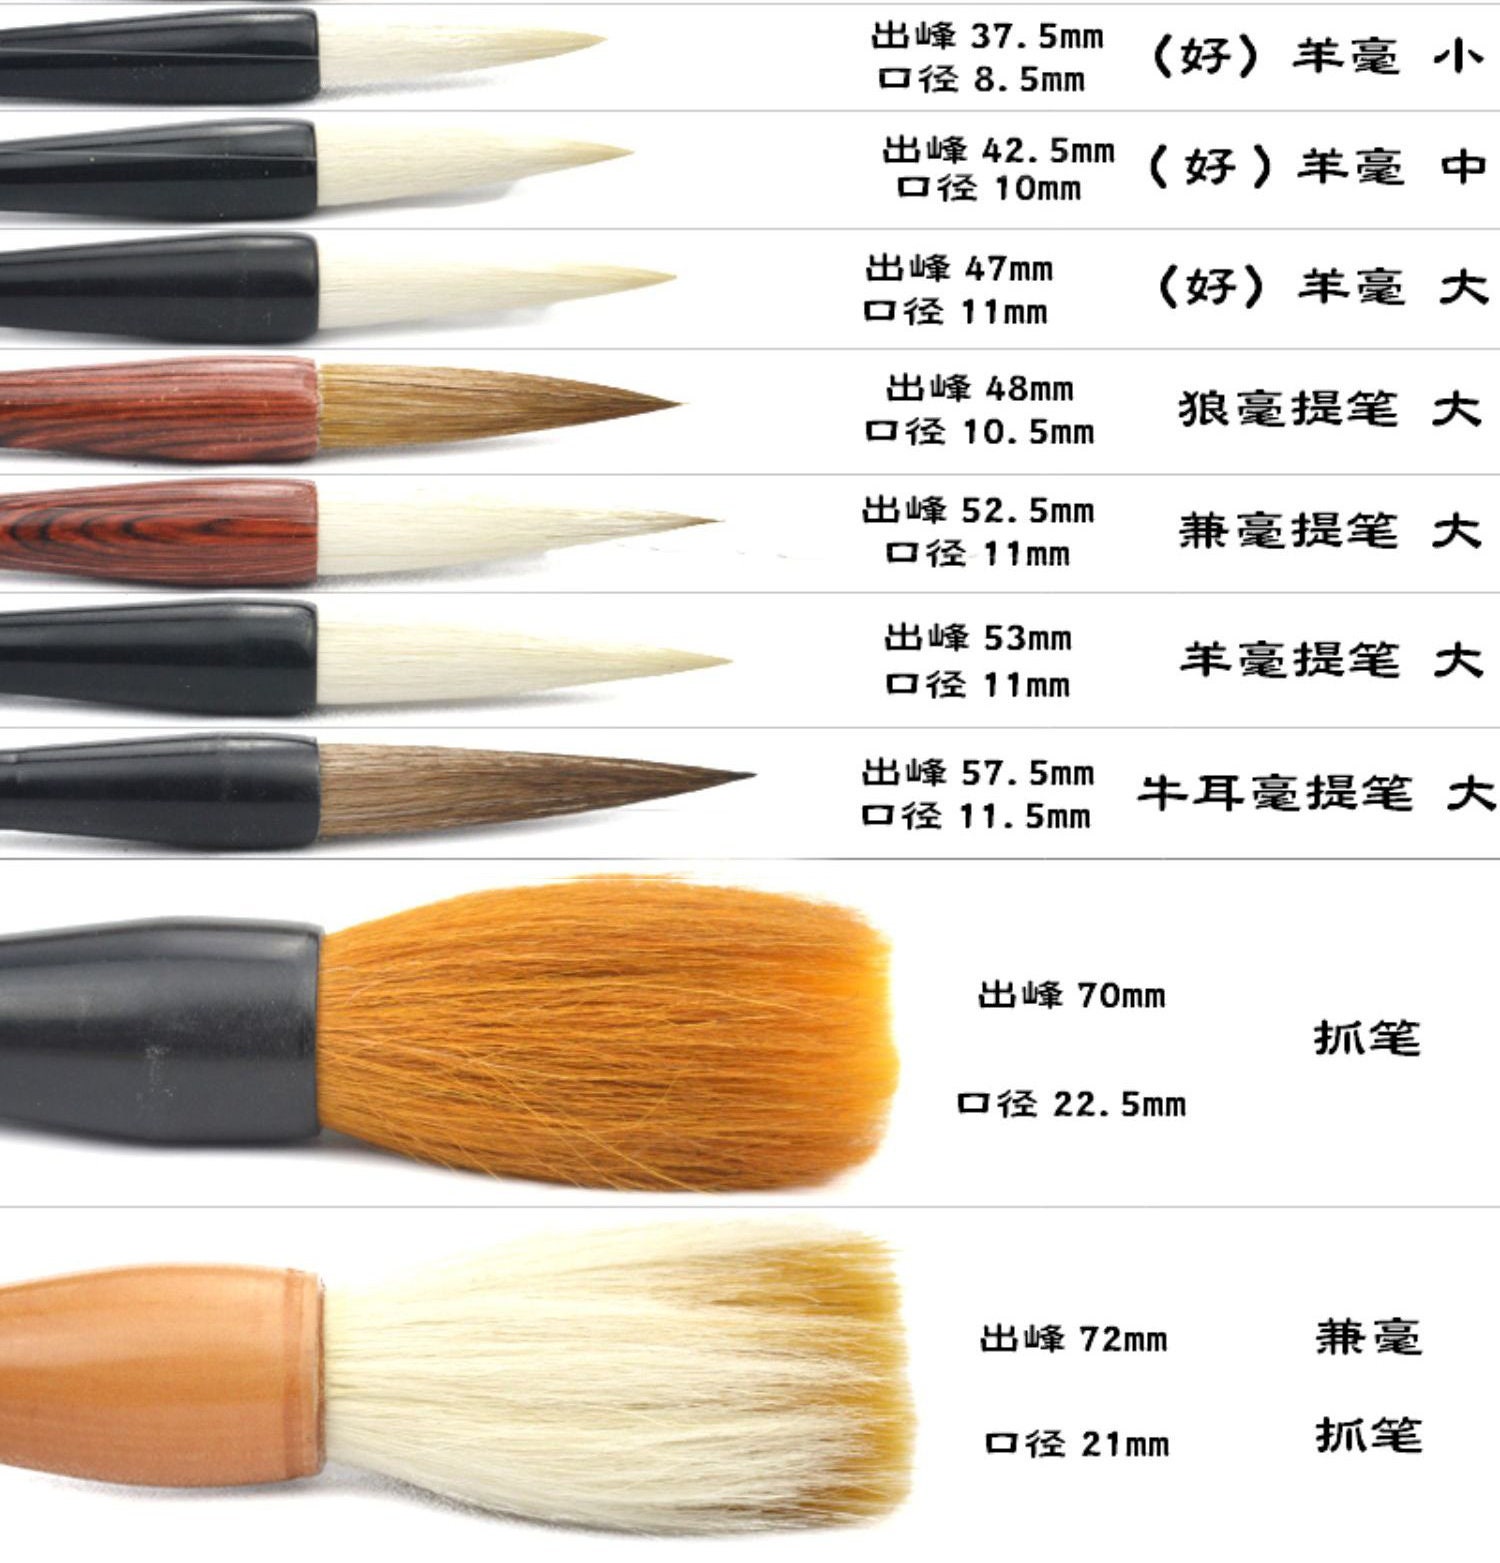 10 Things Chinese Calligraphy Set Brushes Ink Case Writing Chop Kanji Sumi  for Beginners